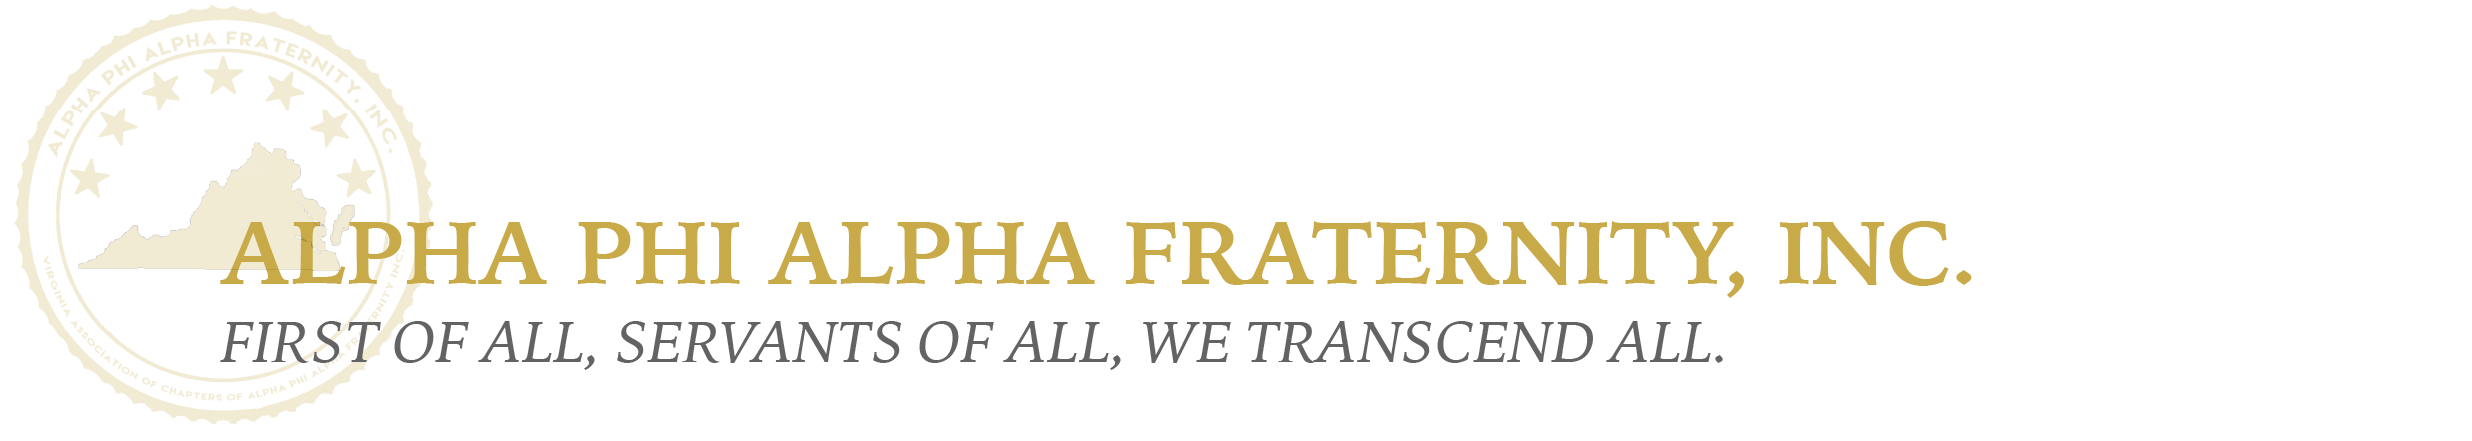 THE VIRGINIA ASSOCIATION OF CHAPTERS OF ALPHA PHI ALPHA FRATERNITY, INC.